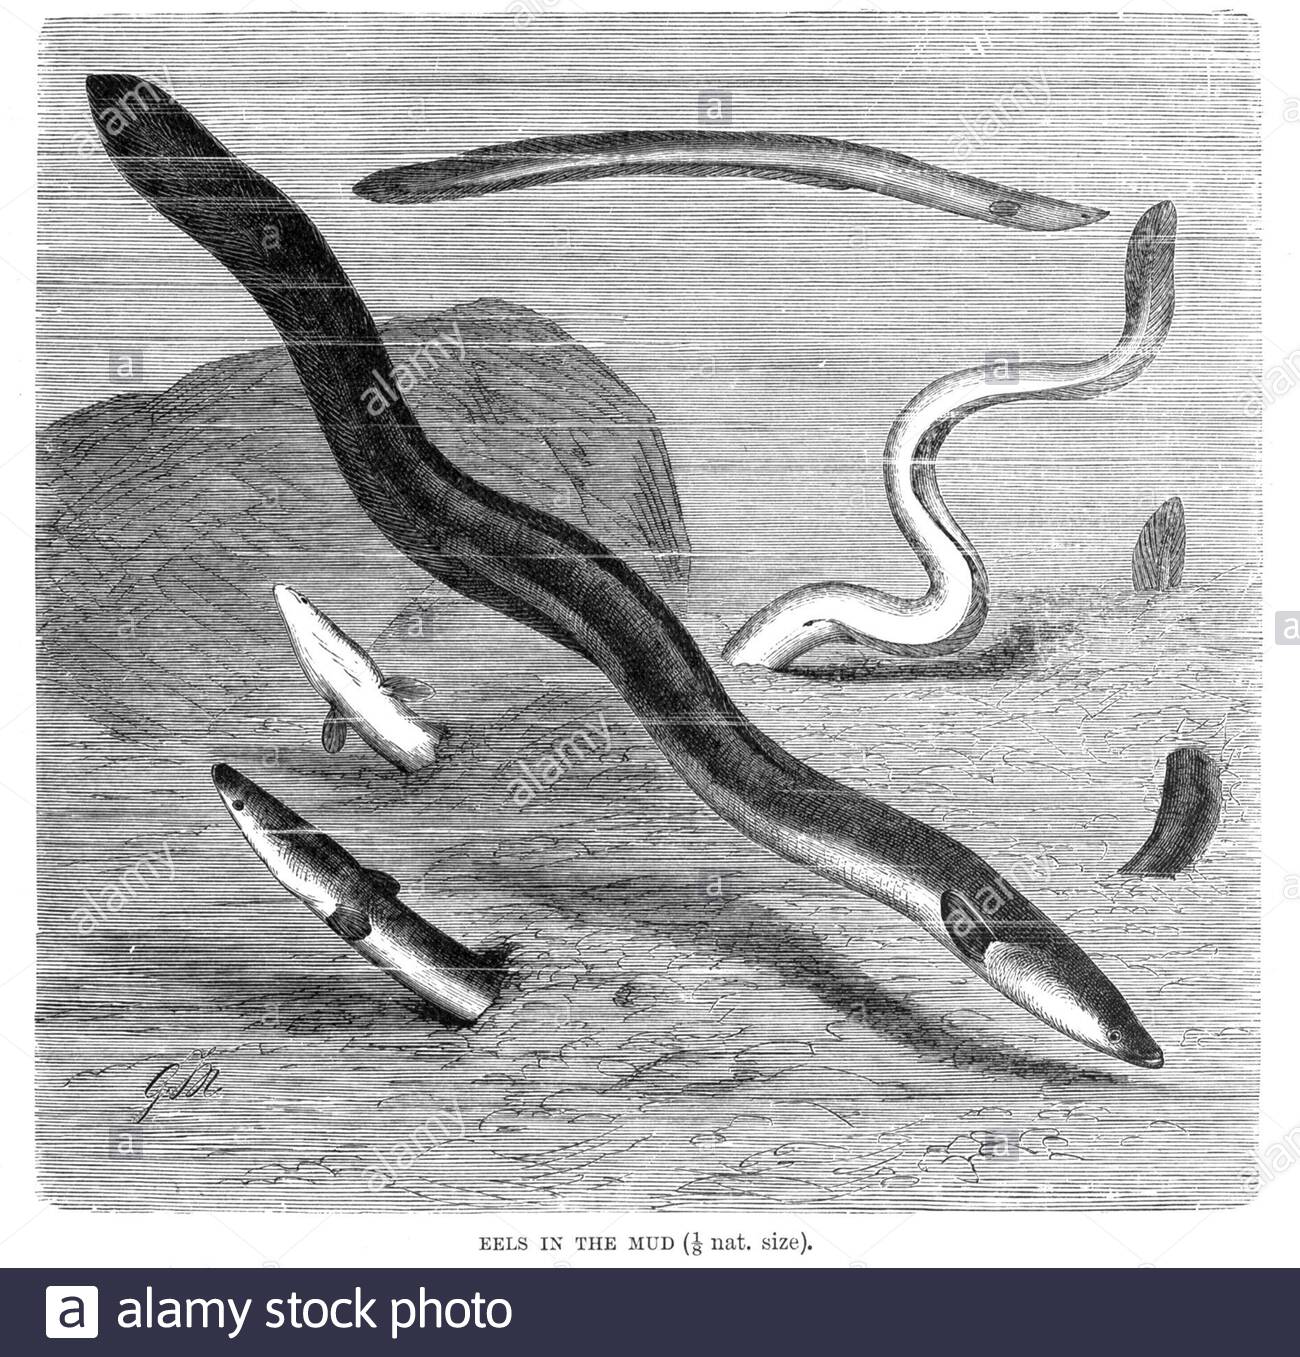 Eels in the mud, vintage illustration from 1896 Stock Photo